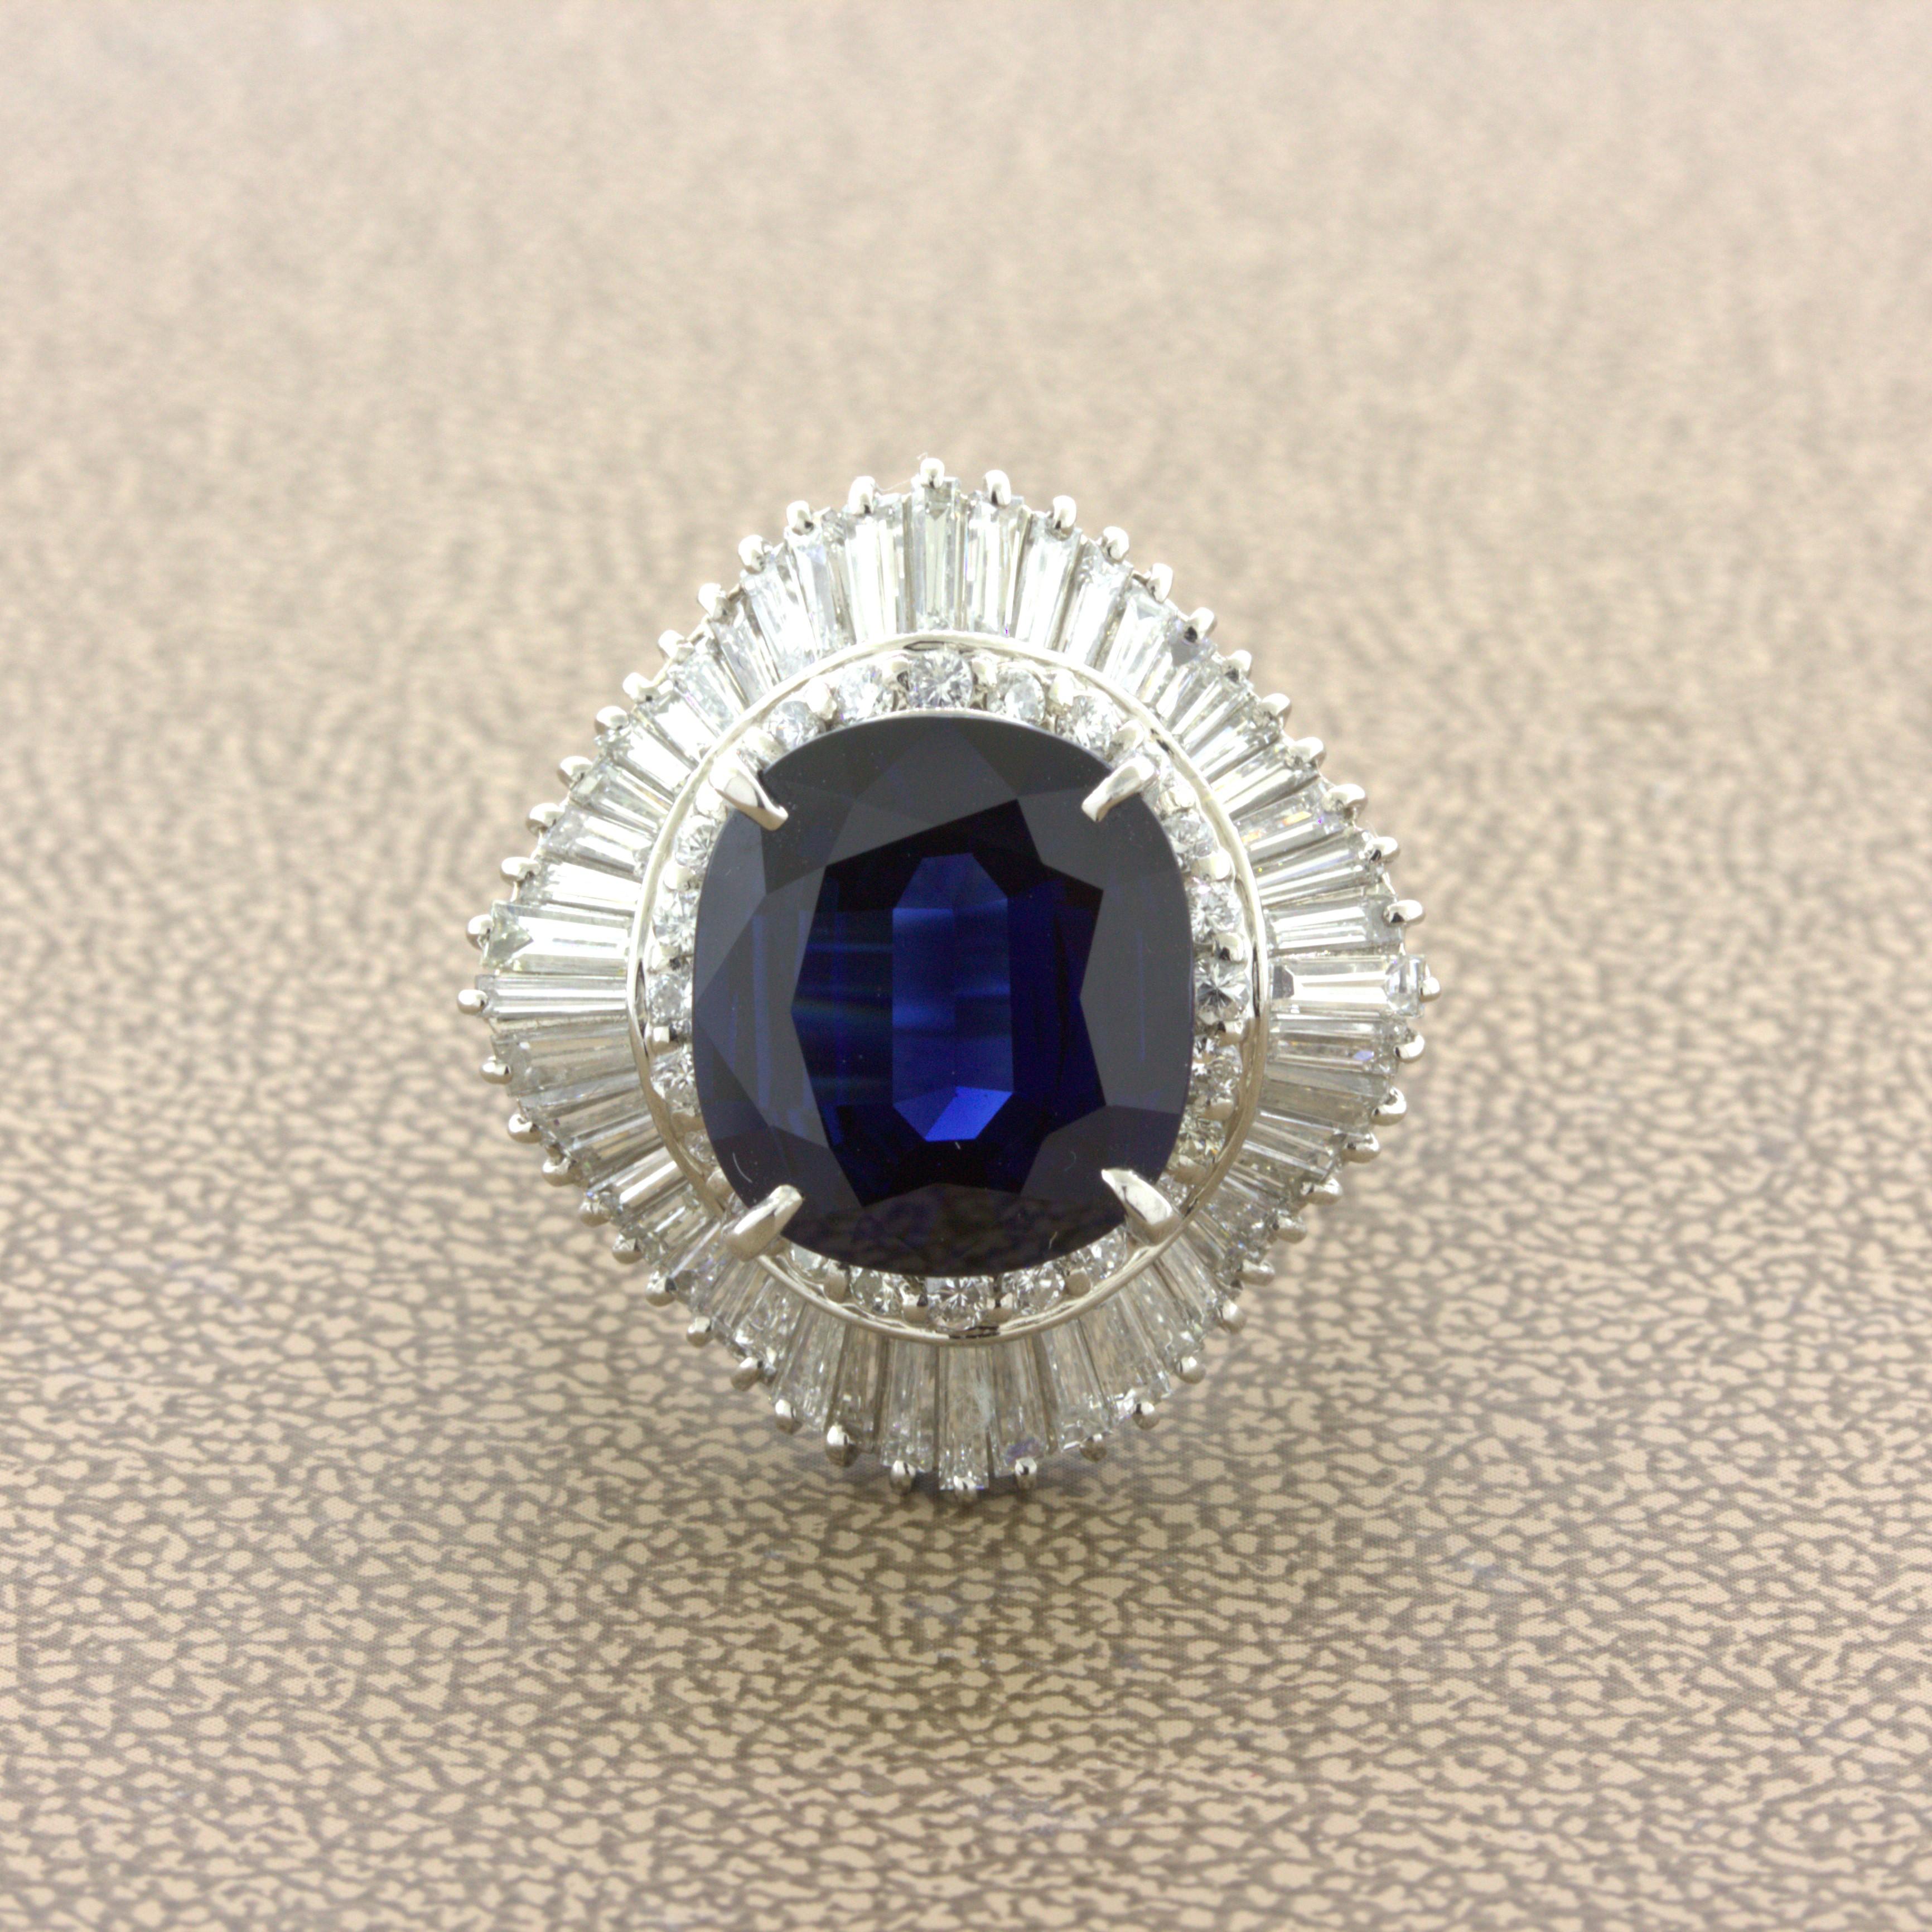 A large and impressive sapphire weighing 7.73 carats takes center stage. It has a rich deep blue color and a lovely cushion shape. Adding to that, it is certified by the GIA as natural with no treatment of any kind. A rare and beautiful gem. It is